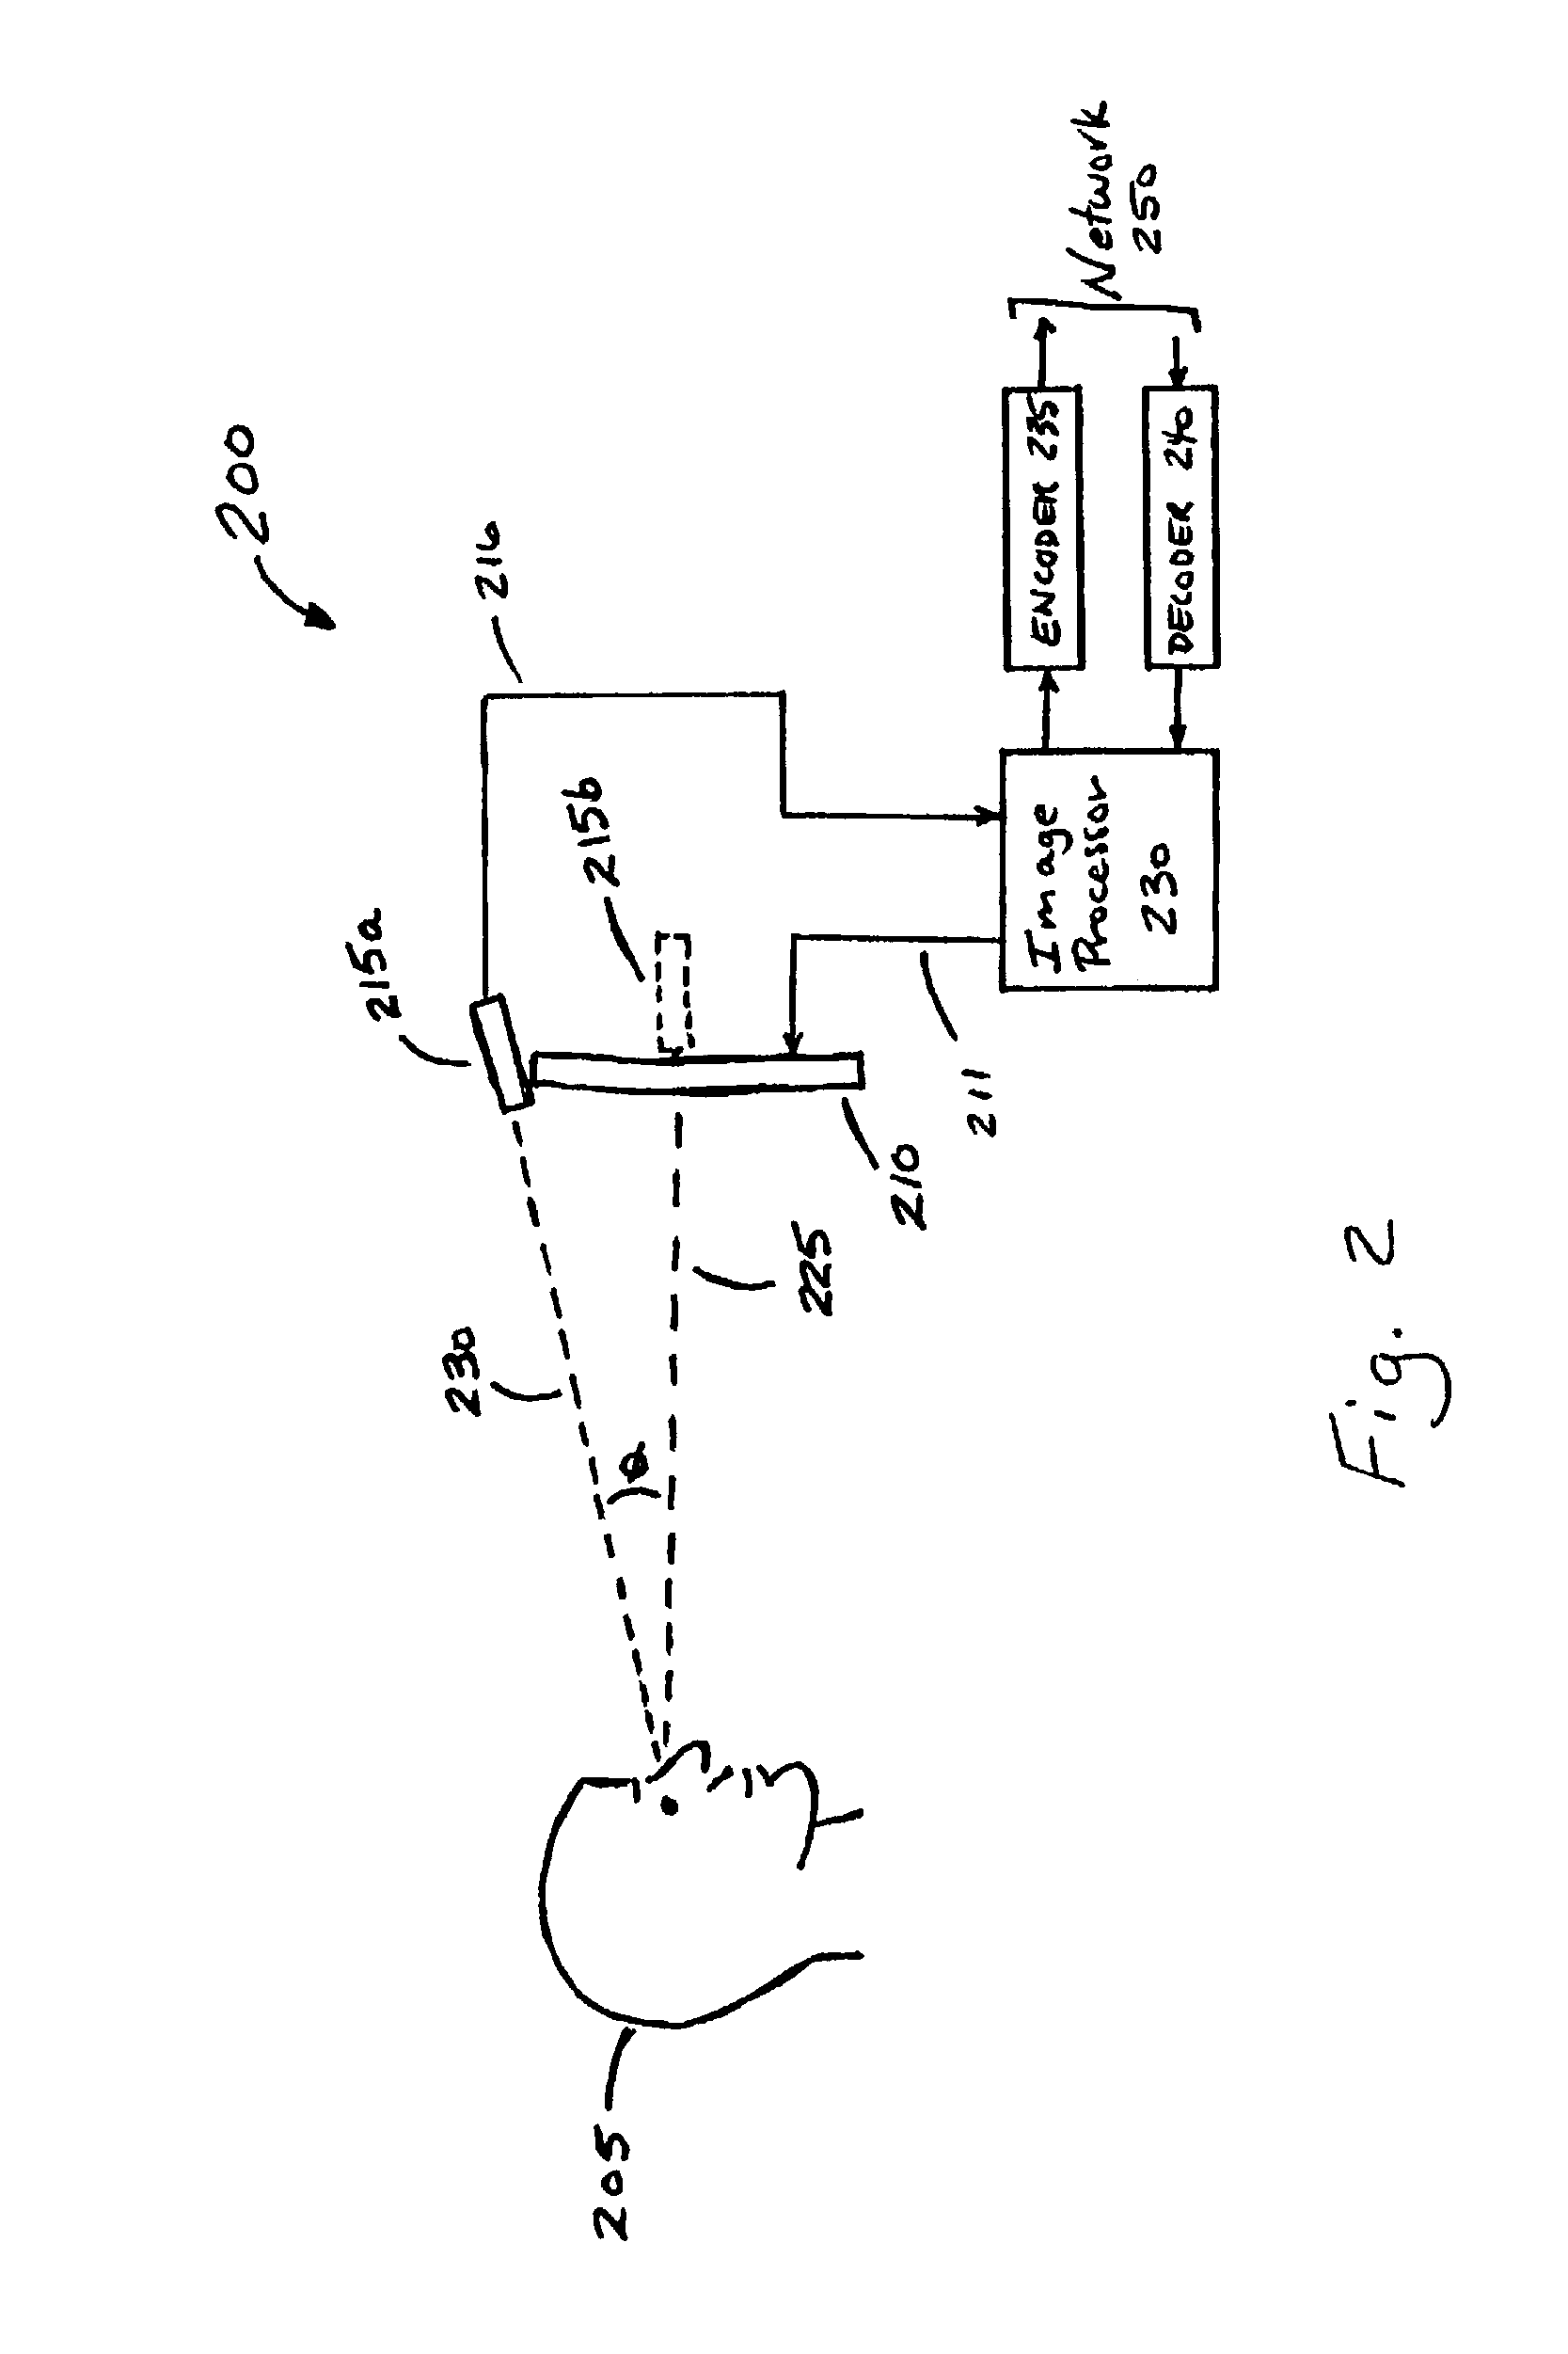 Integral eye-path alignment on telephony and computer video devices using two or more image sensing devices